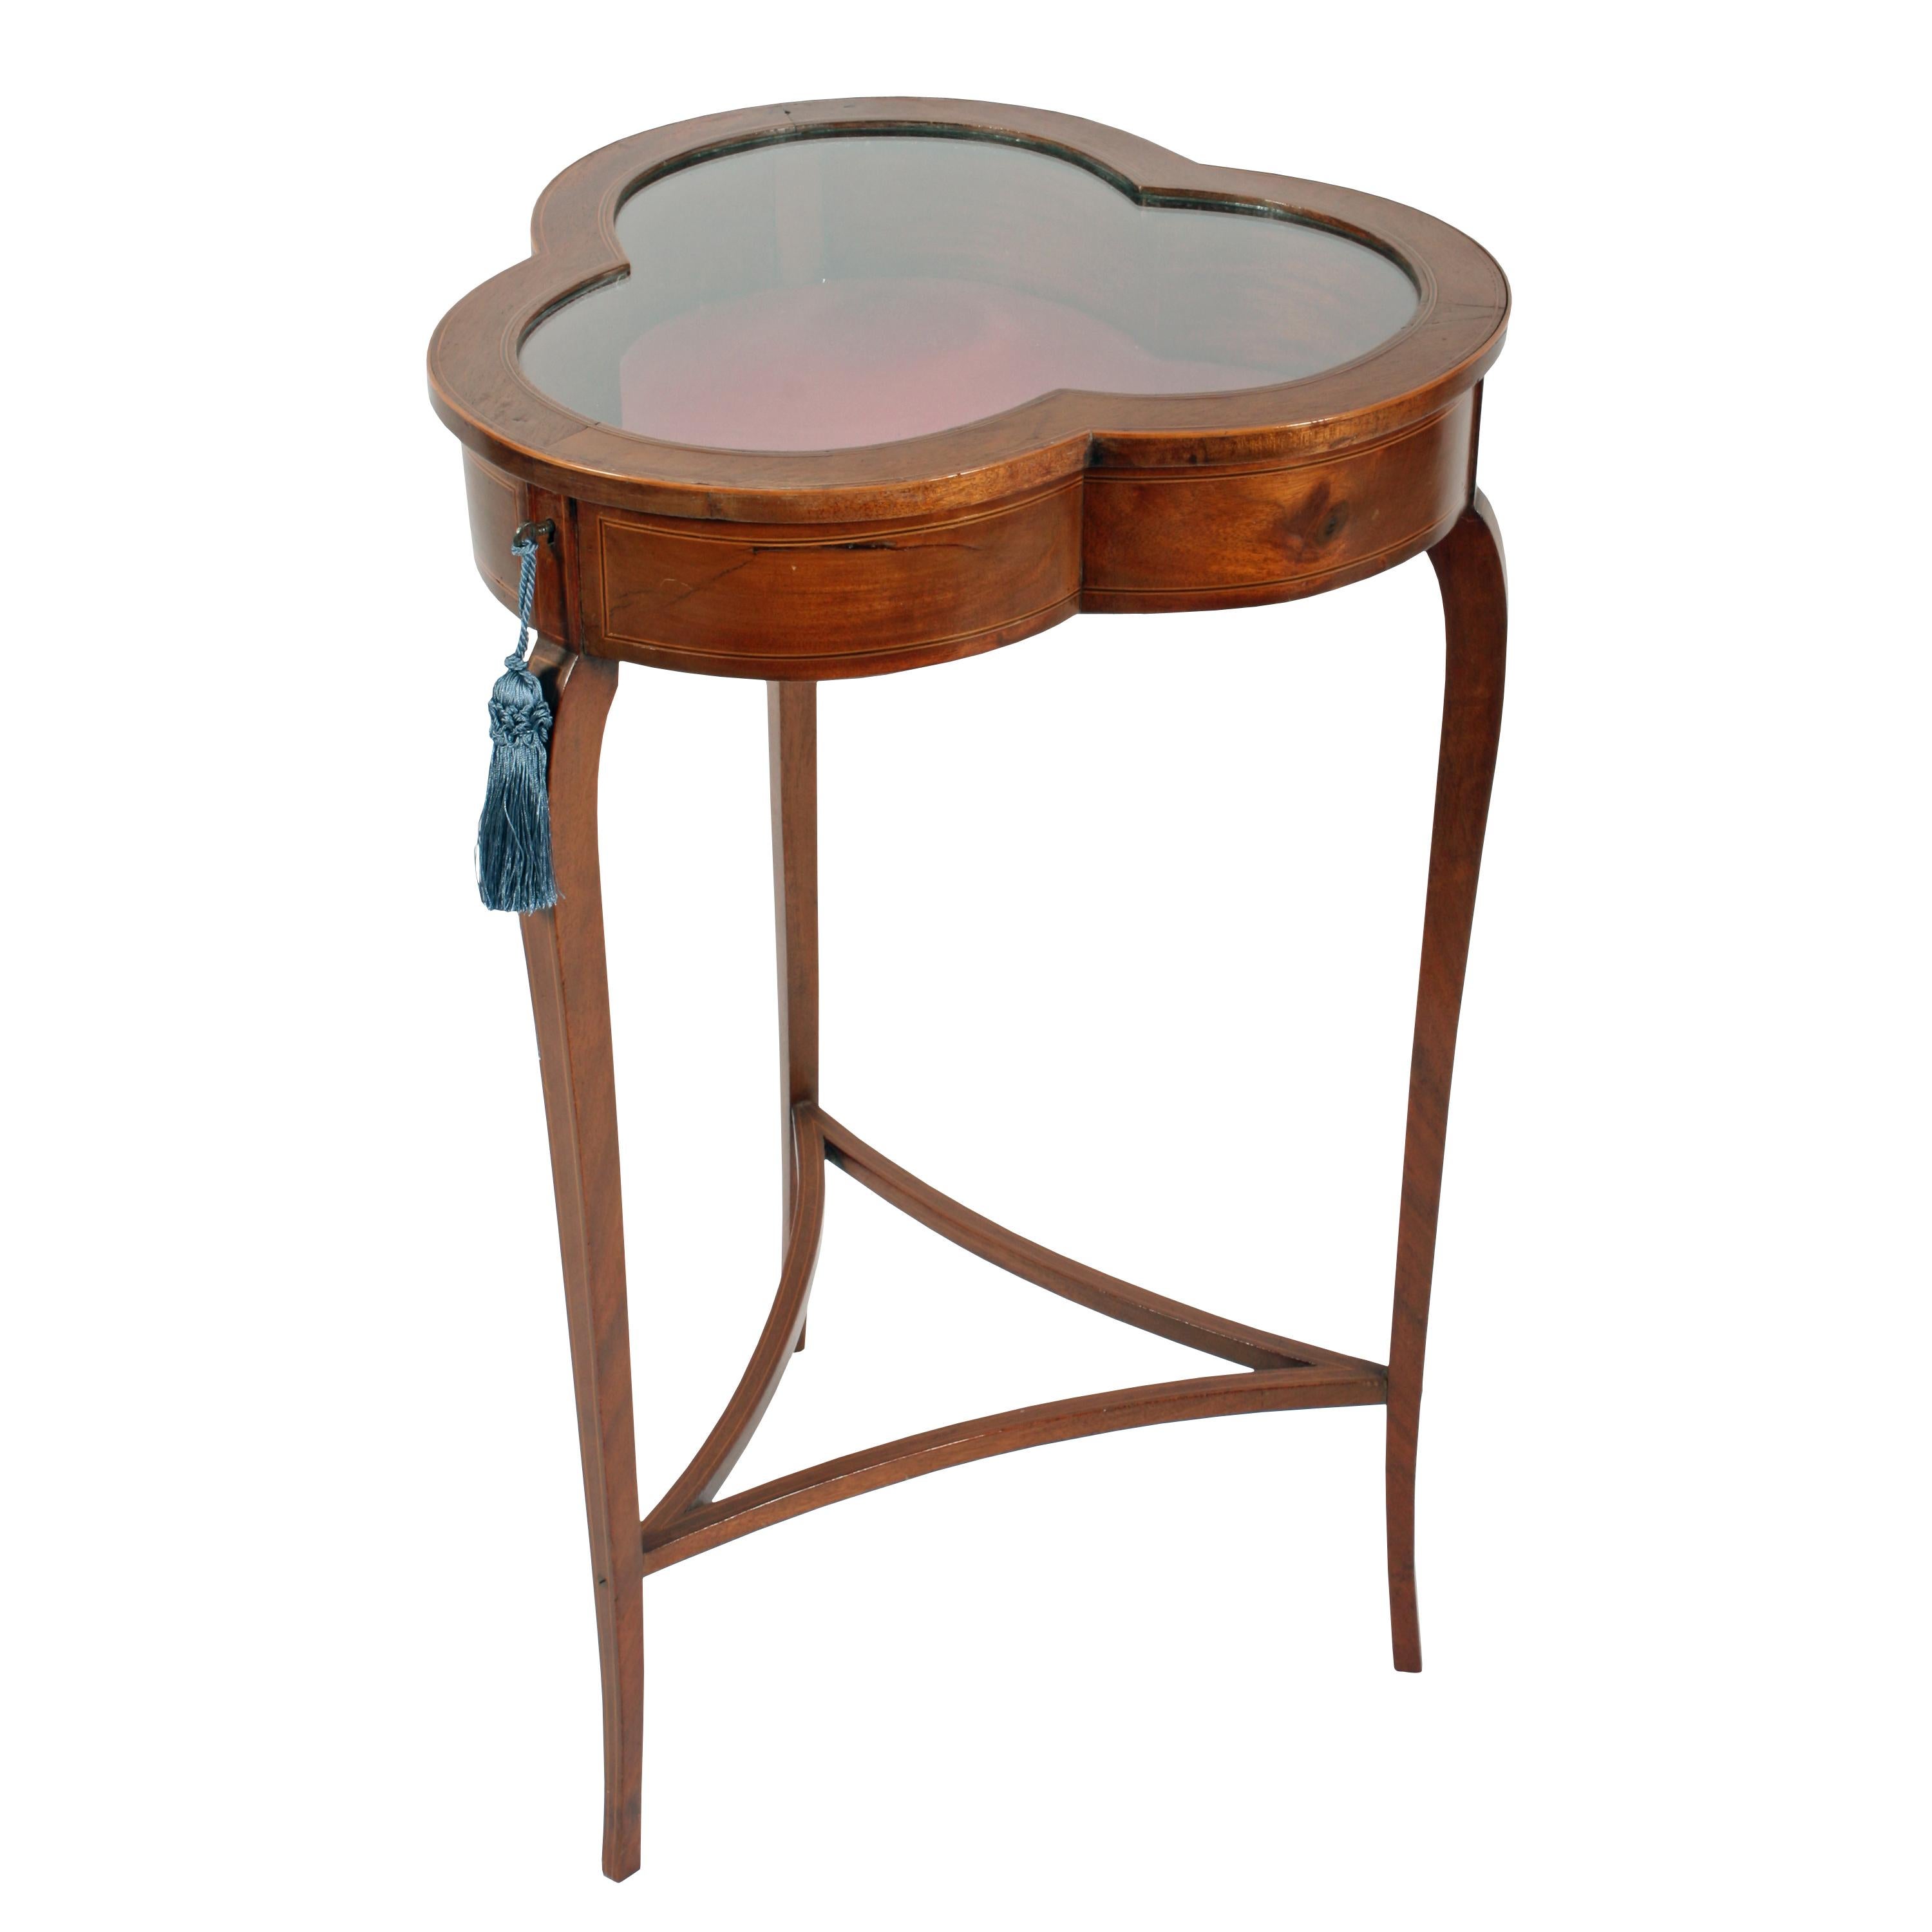 An early 20th century Edwardian inlaid mahogany clover leaf shaped bijouterie table or vitrine.

The shaped top has a glazed hinged lid with a lock and key and a dark pink coloured material interior.

The table stands on three square sided